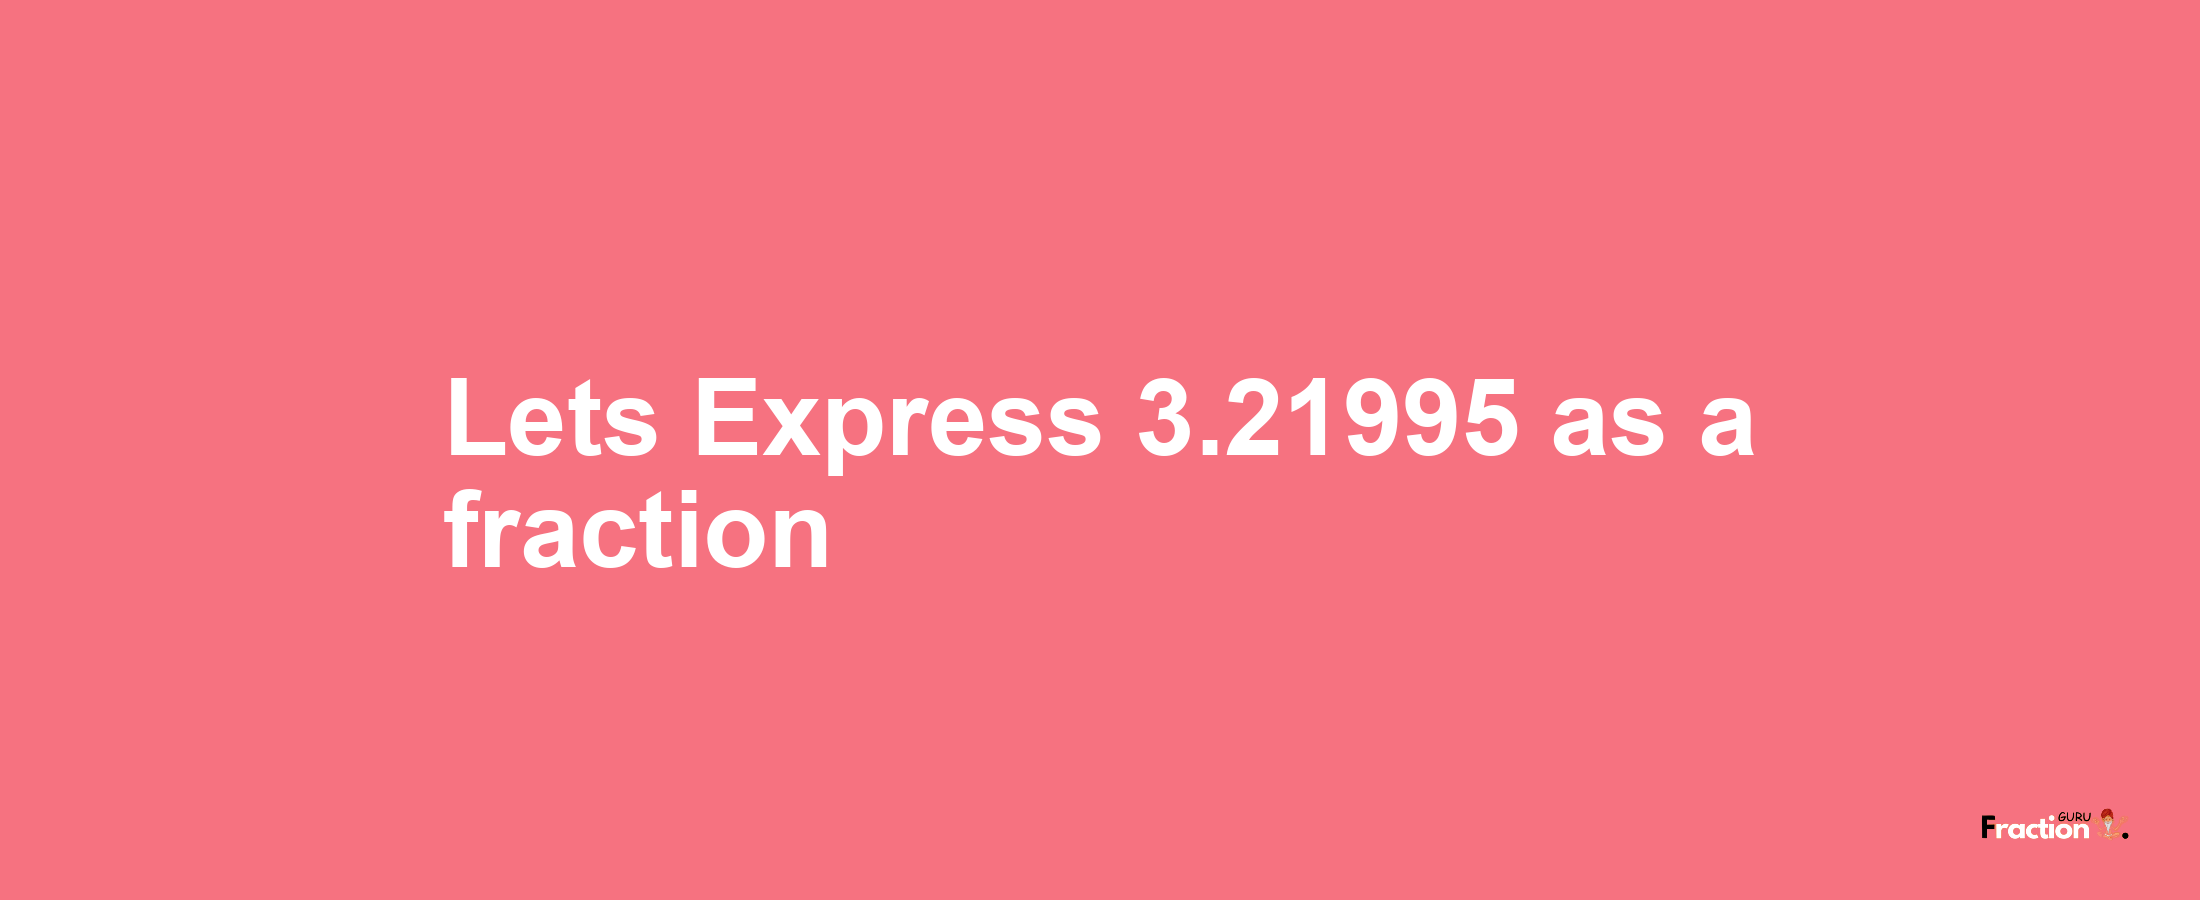 Lets Express 3.21995 as afraction